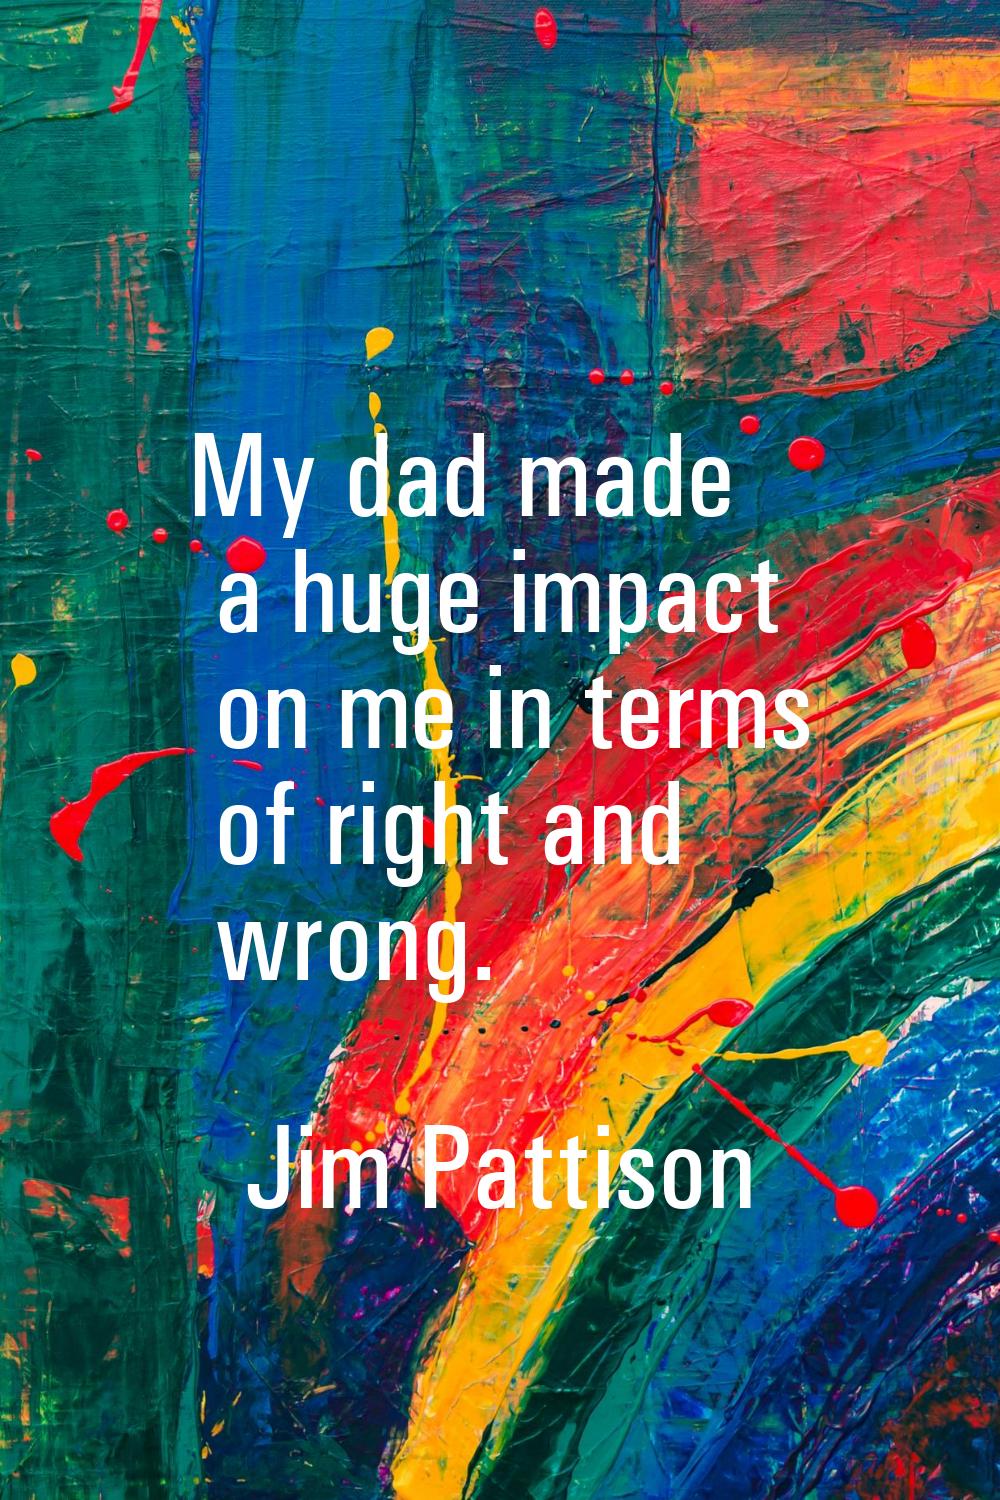 My dad made a huge impact on me in terms of right and wrong.